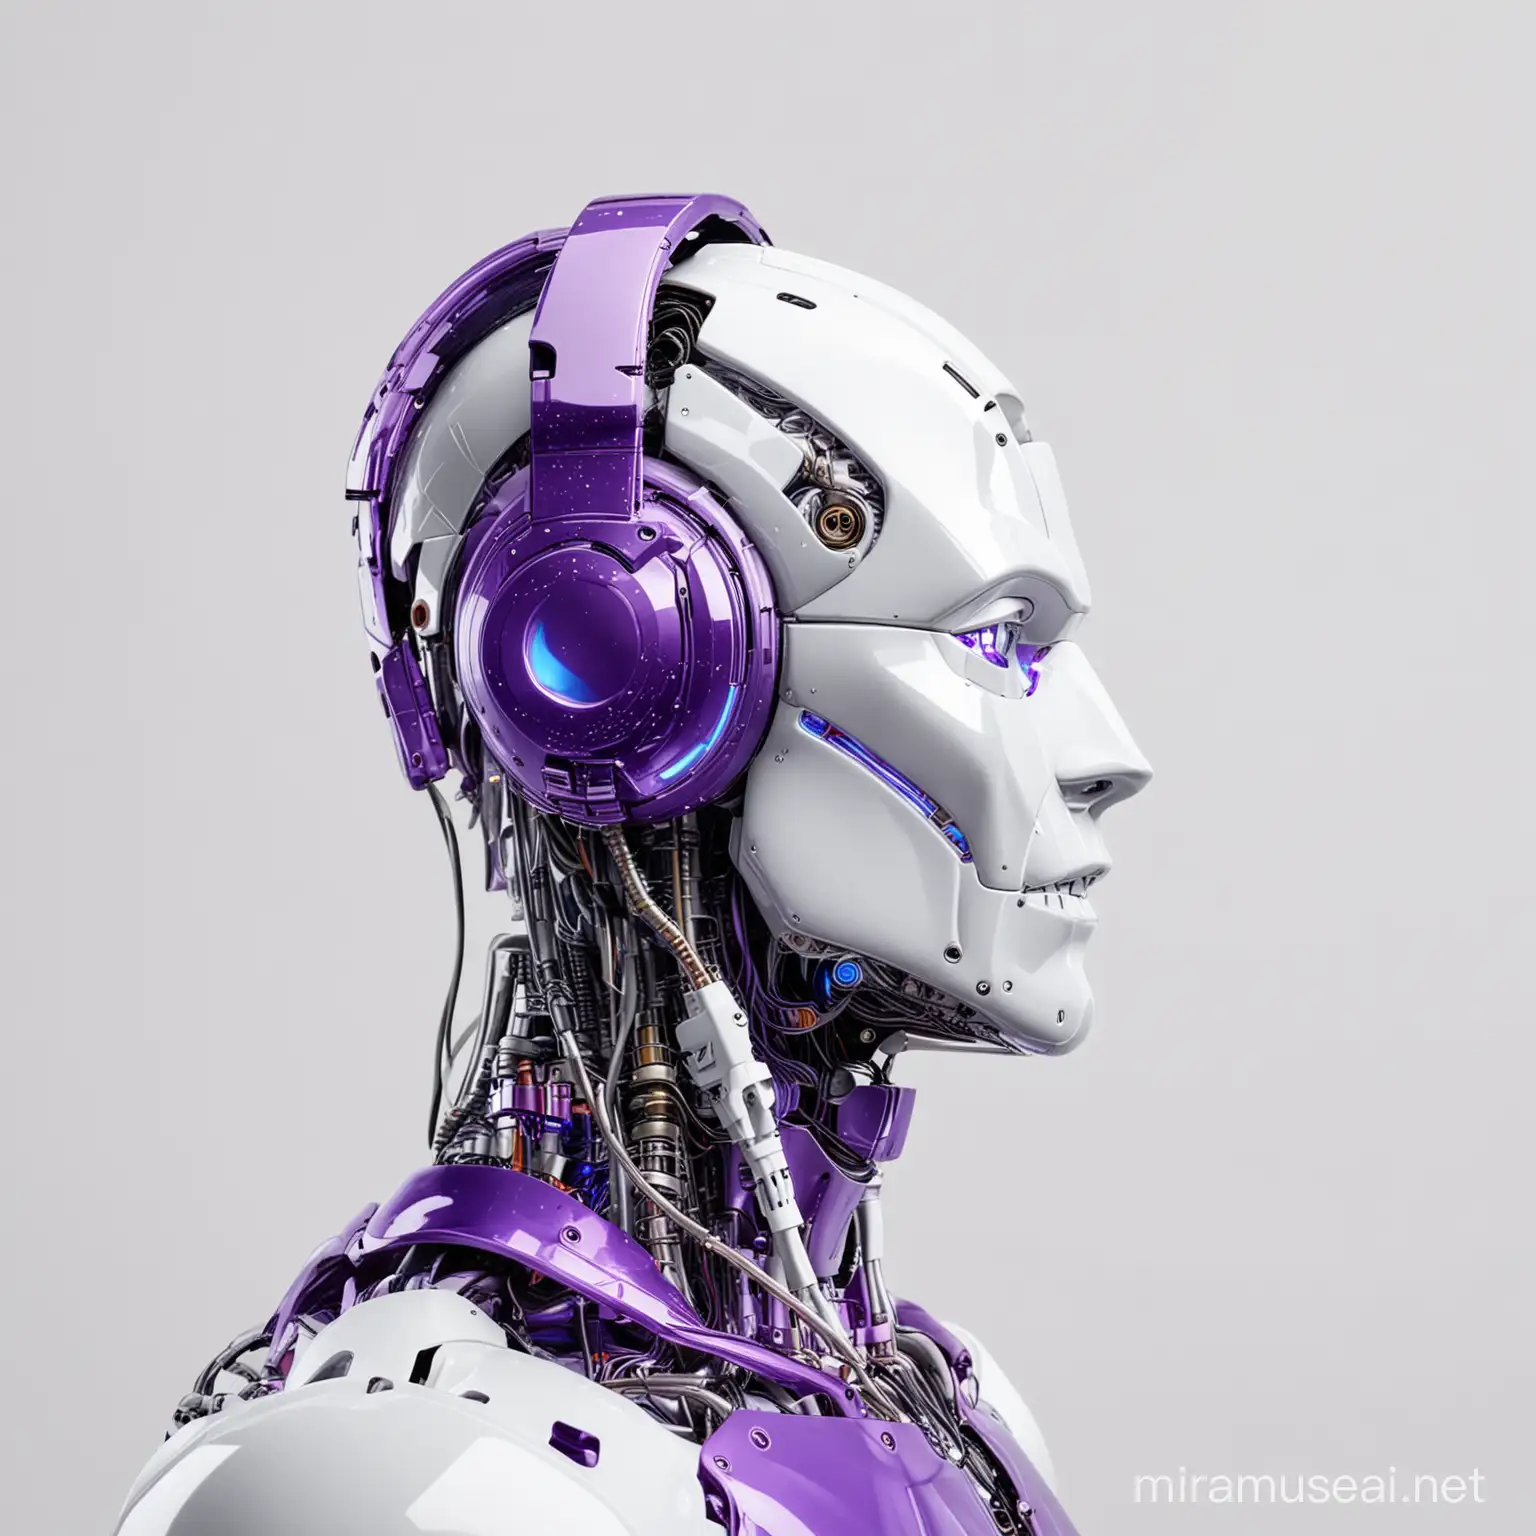 Shiny Purple Headphones Worn by Male Robot Side Profile View on White Background